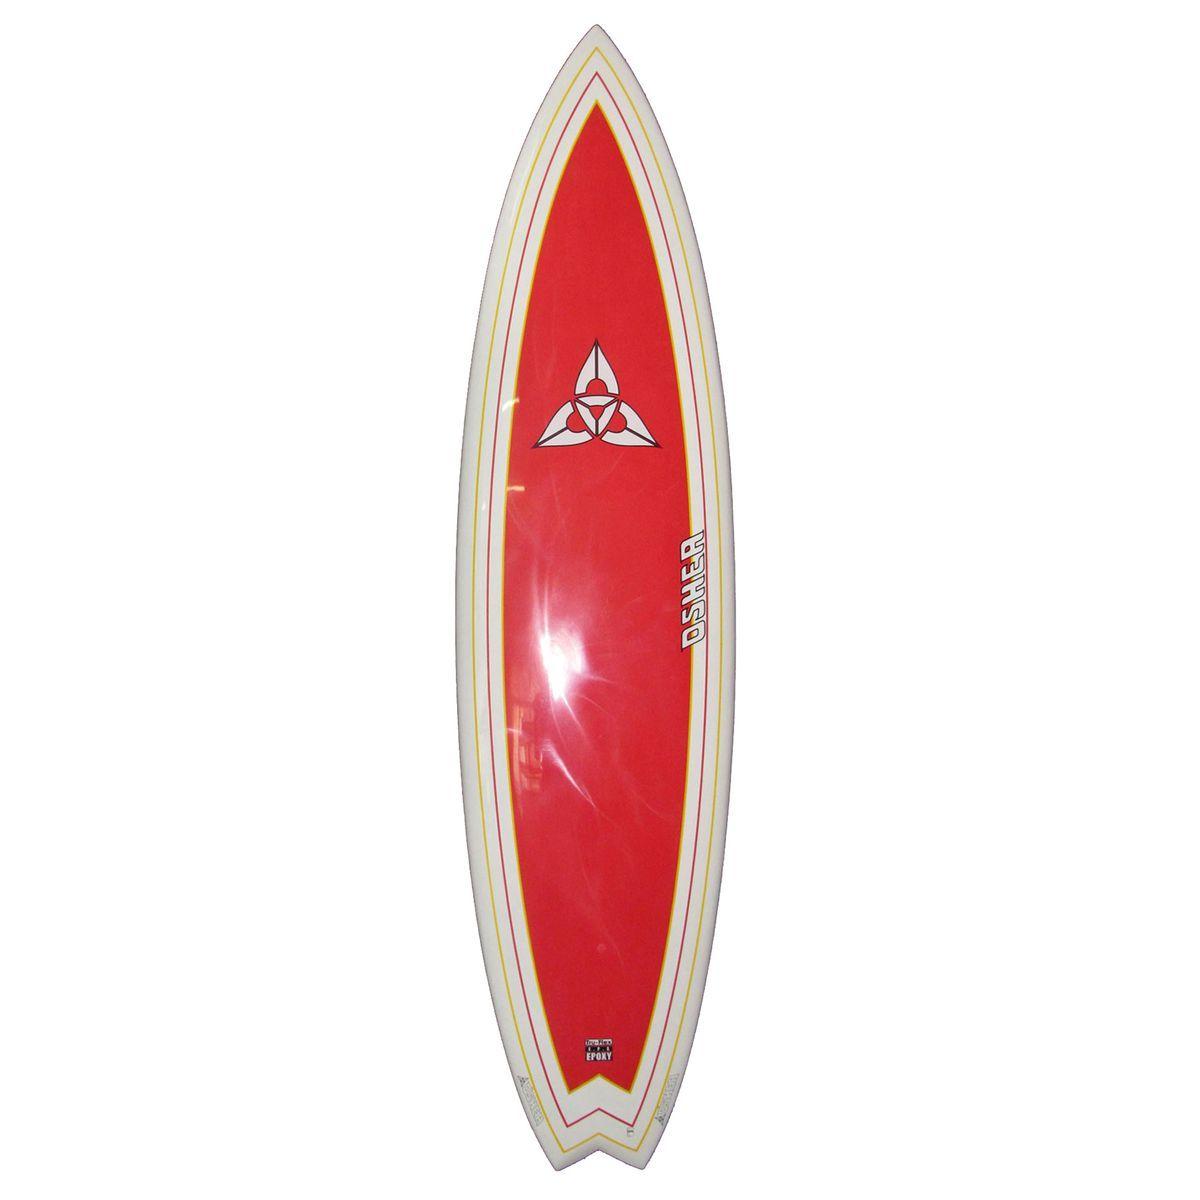 Red Surfboard Logo - O'Shea Fat Boy EPS Red Surfboard - 7ft 2 | Free Delivery options